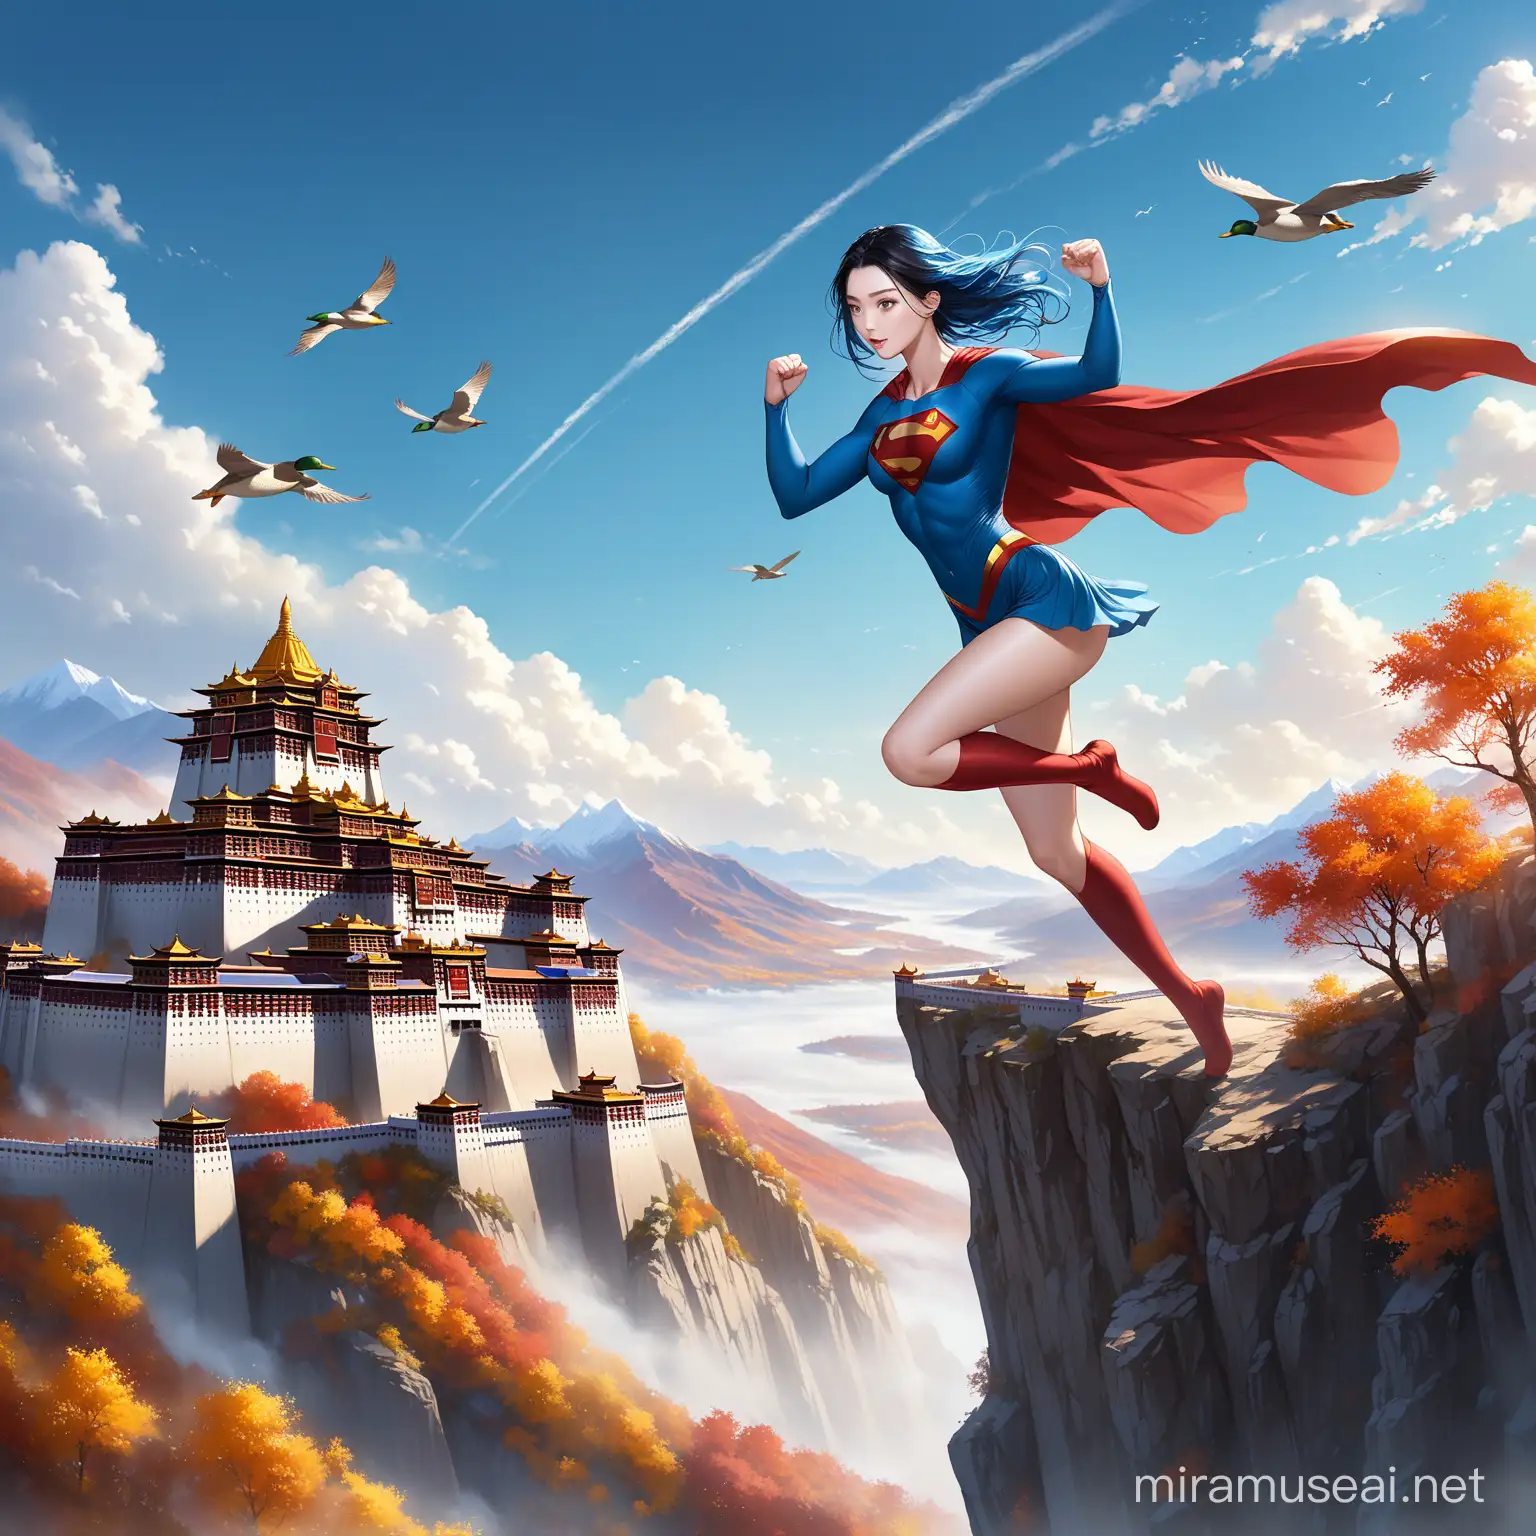 birdview , ultra detail ,SUPER WOMAN real face 28years old fanbingbing WITH THE OUTFIT OF SUPERMAN, open blue hair, shining eyelights, flying over sharp cliff in air flying, real fist and hand properly , real longer legs extend, autumn, cloudy, misty ,clearsky, mallard scared by her, vast moutain around,real look Potala Palace，tibet,